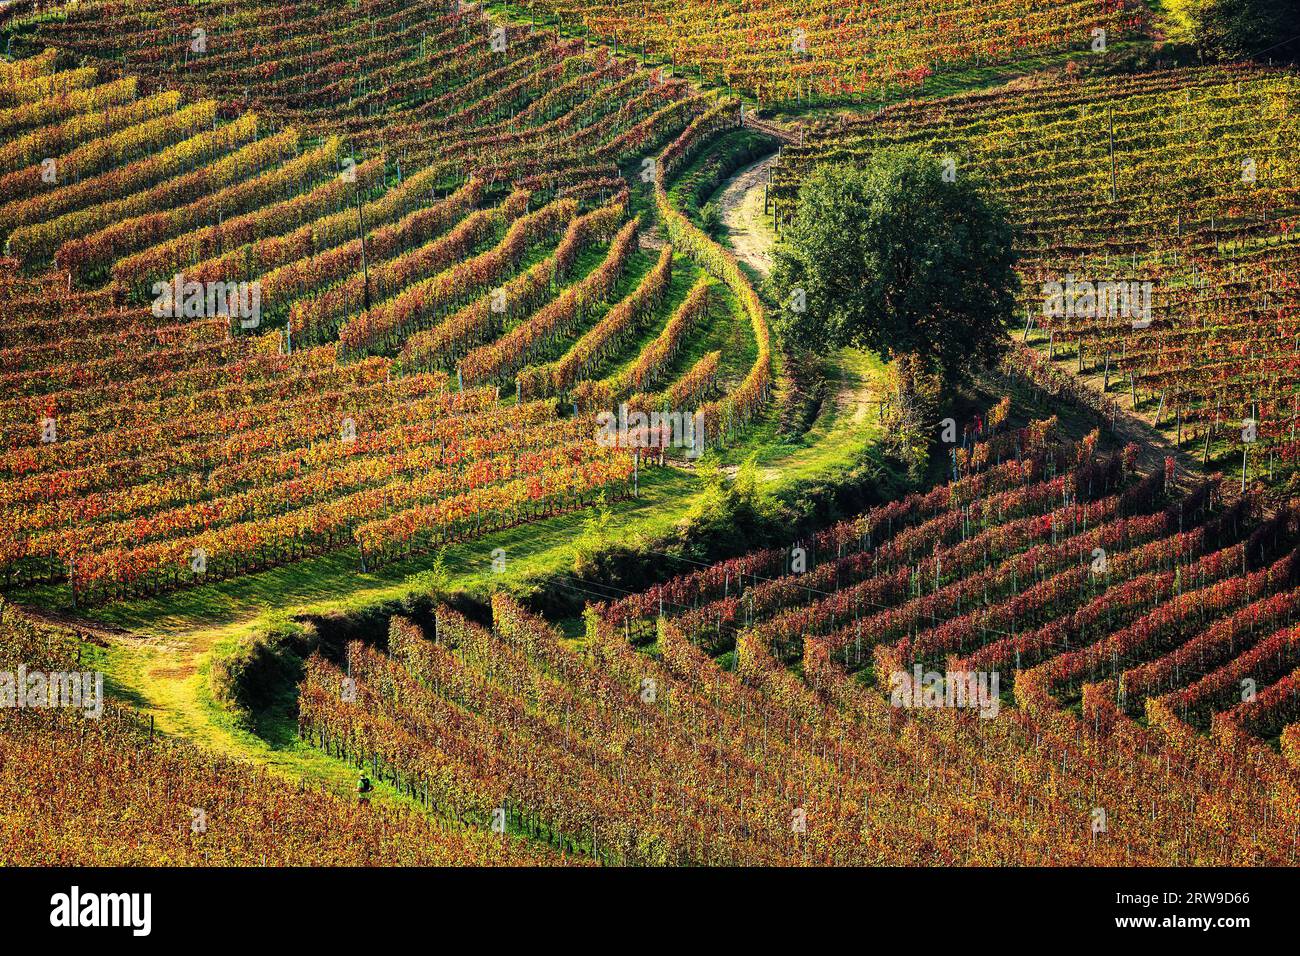 Rural road among colorful autumnal vineyards grow on the hill in Piedmont, Italy. Stock Photo